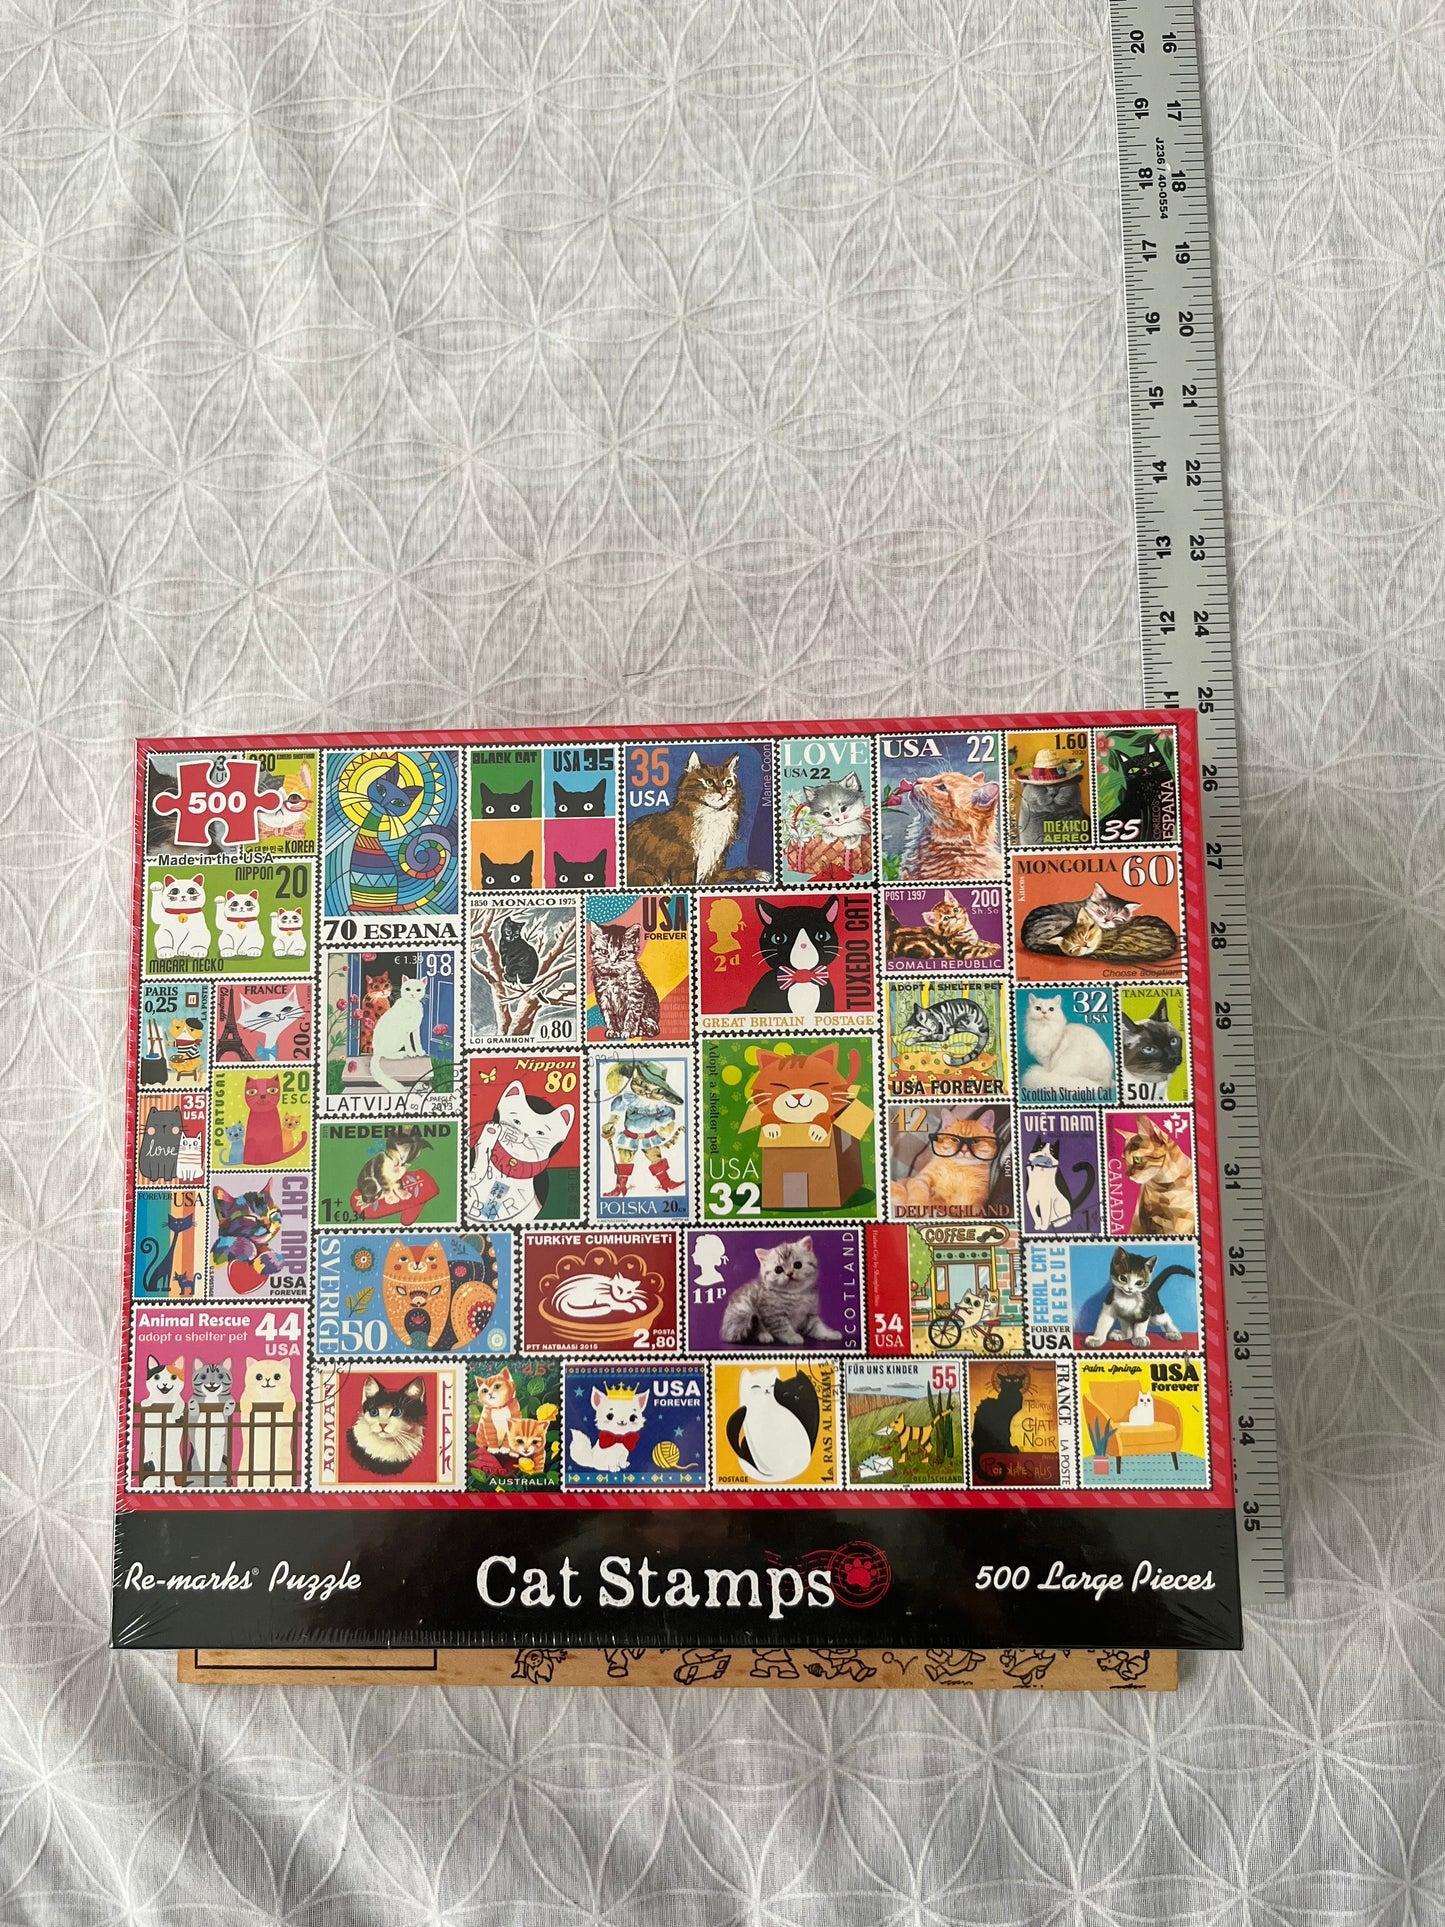 Cat Stamps Collage 500 Large Piece Jigsaw Puzzle